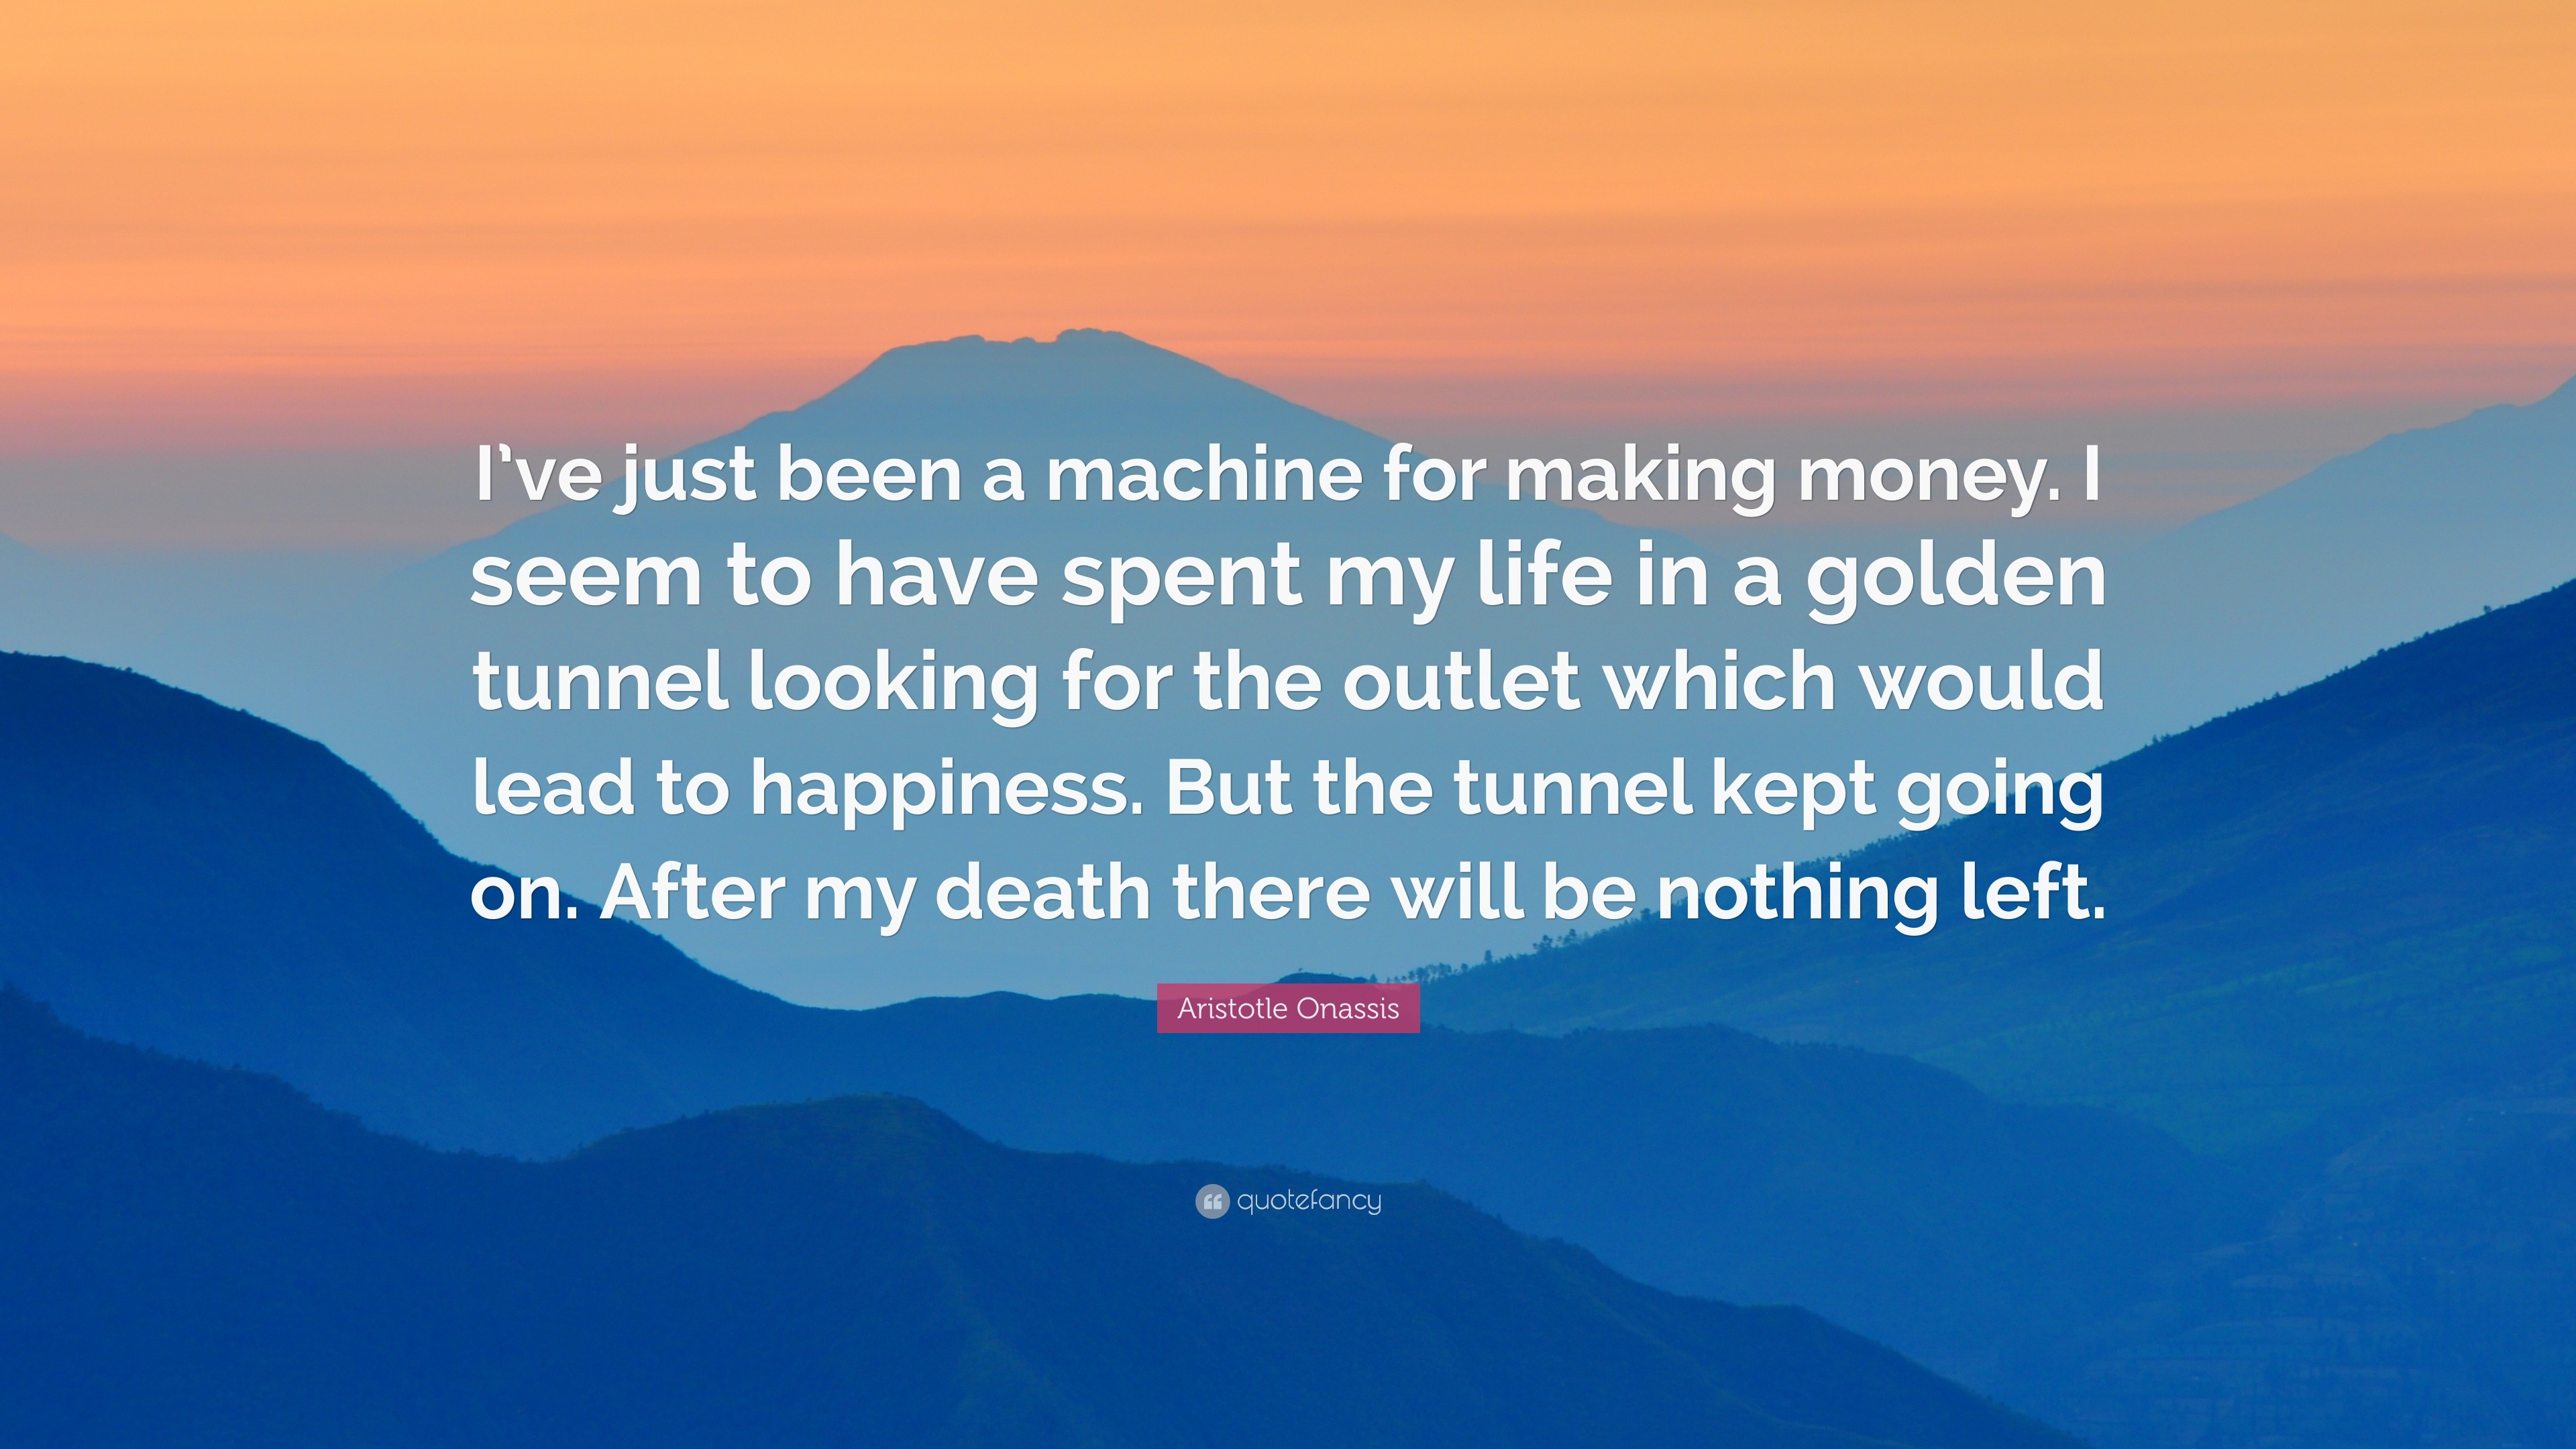 3840x2160 Aristotle Onassis Quote: “I've just been a machine for making money.